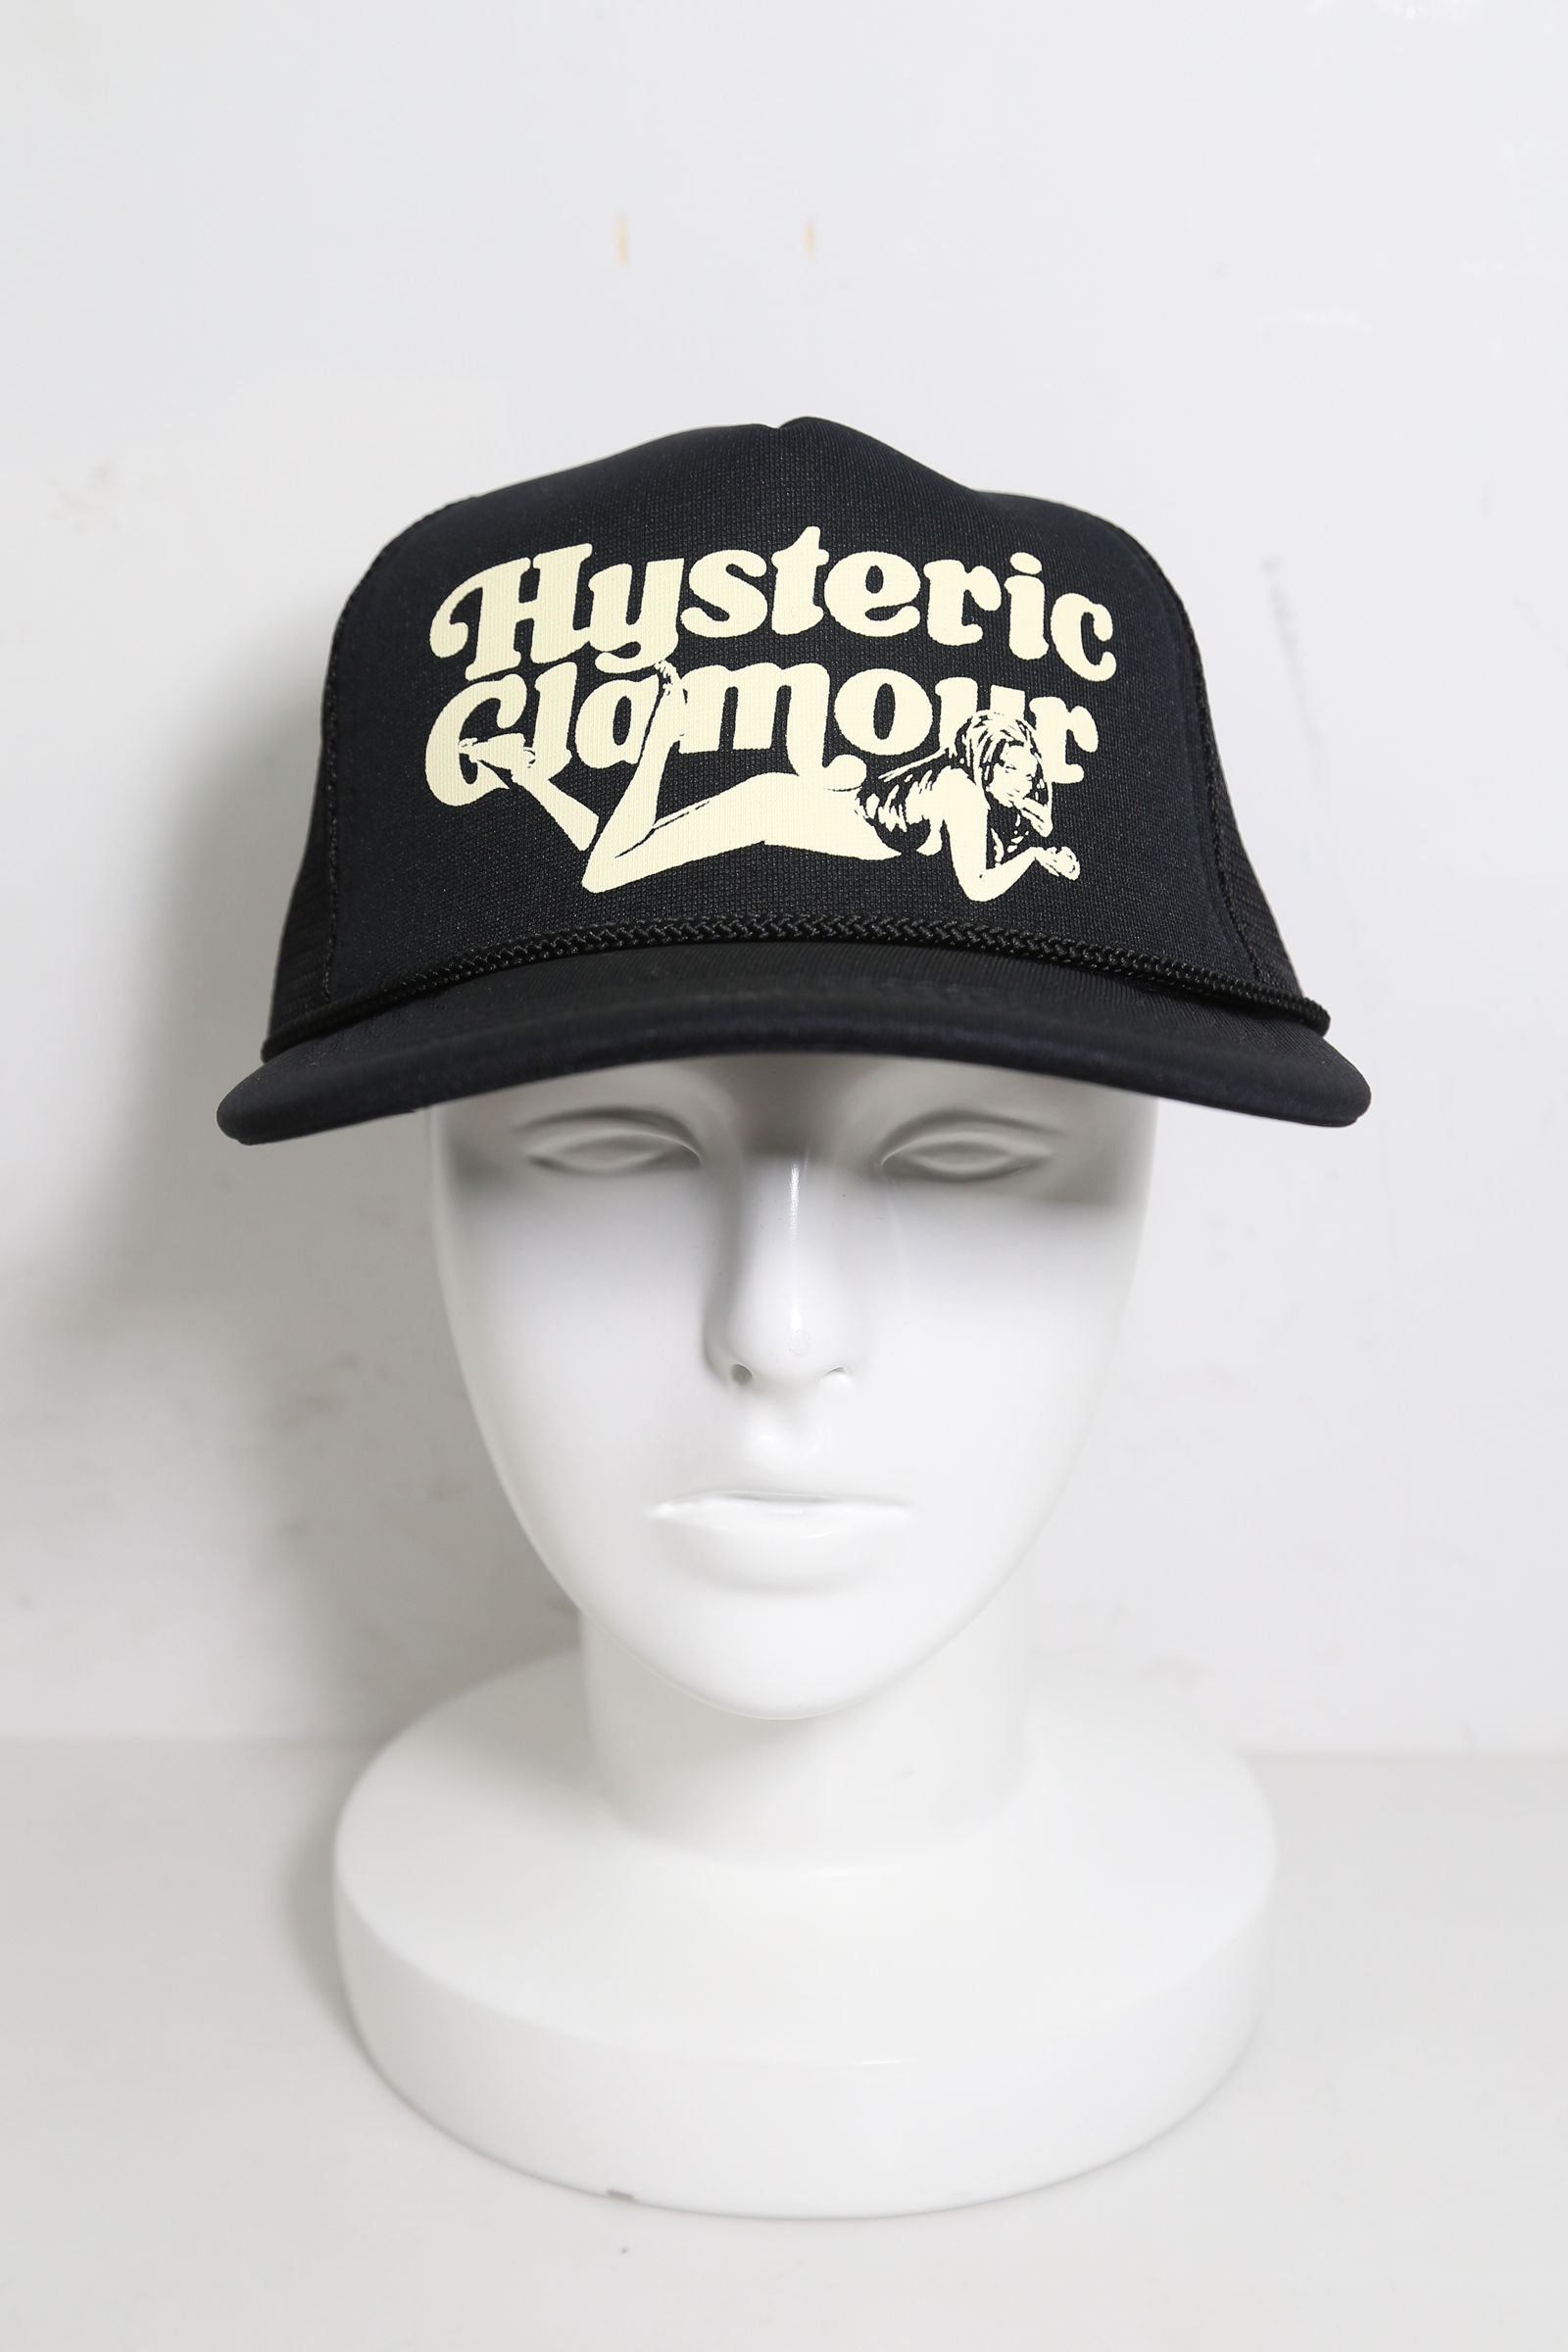 HYSTERIC GLAMOUR - LIE DOWN GIRL メッシュキャップ / ブラック | Tempt